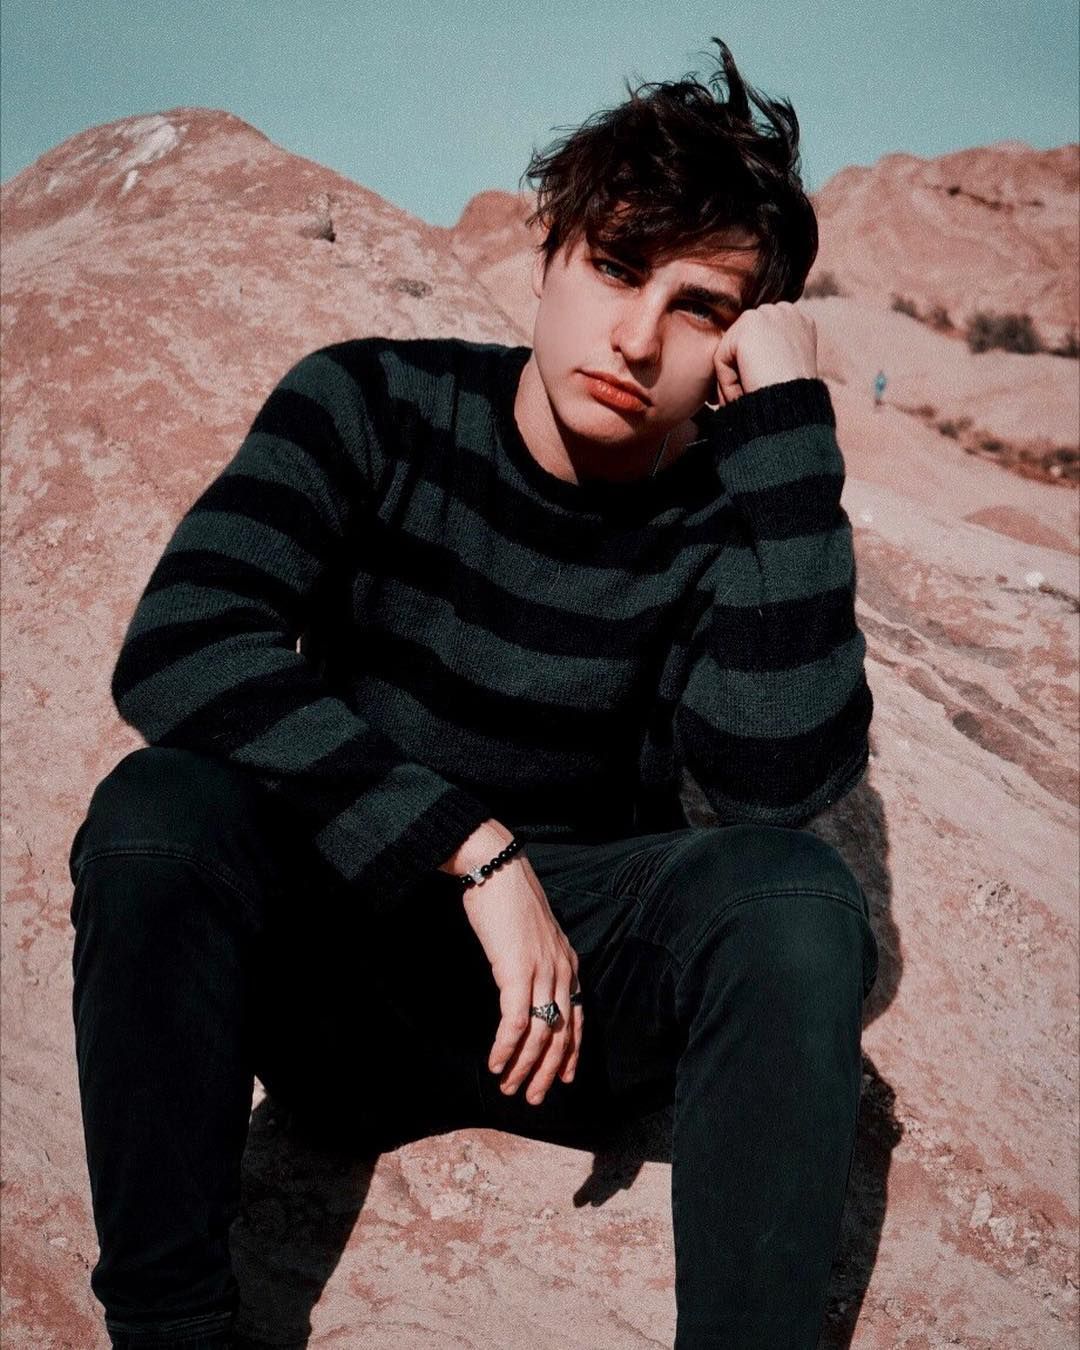 8k Likes, 7,308 Comments - Cute Wallpaper Colby Brock , HD Wallpaper & Backgrounds